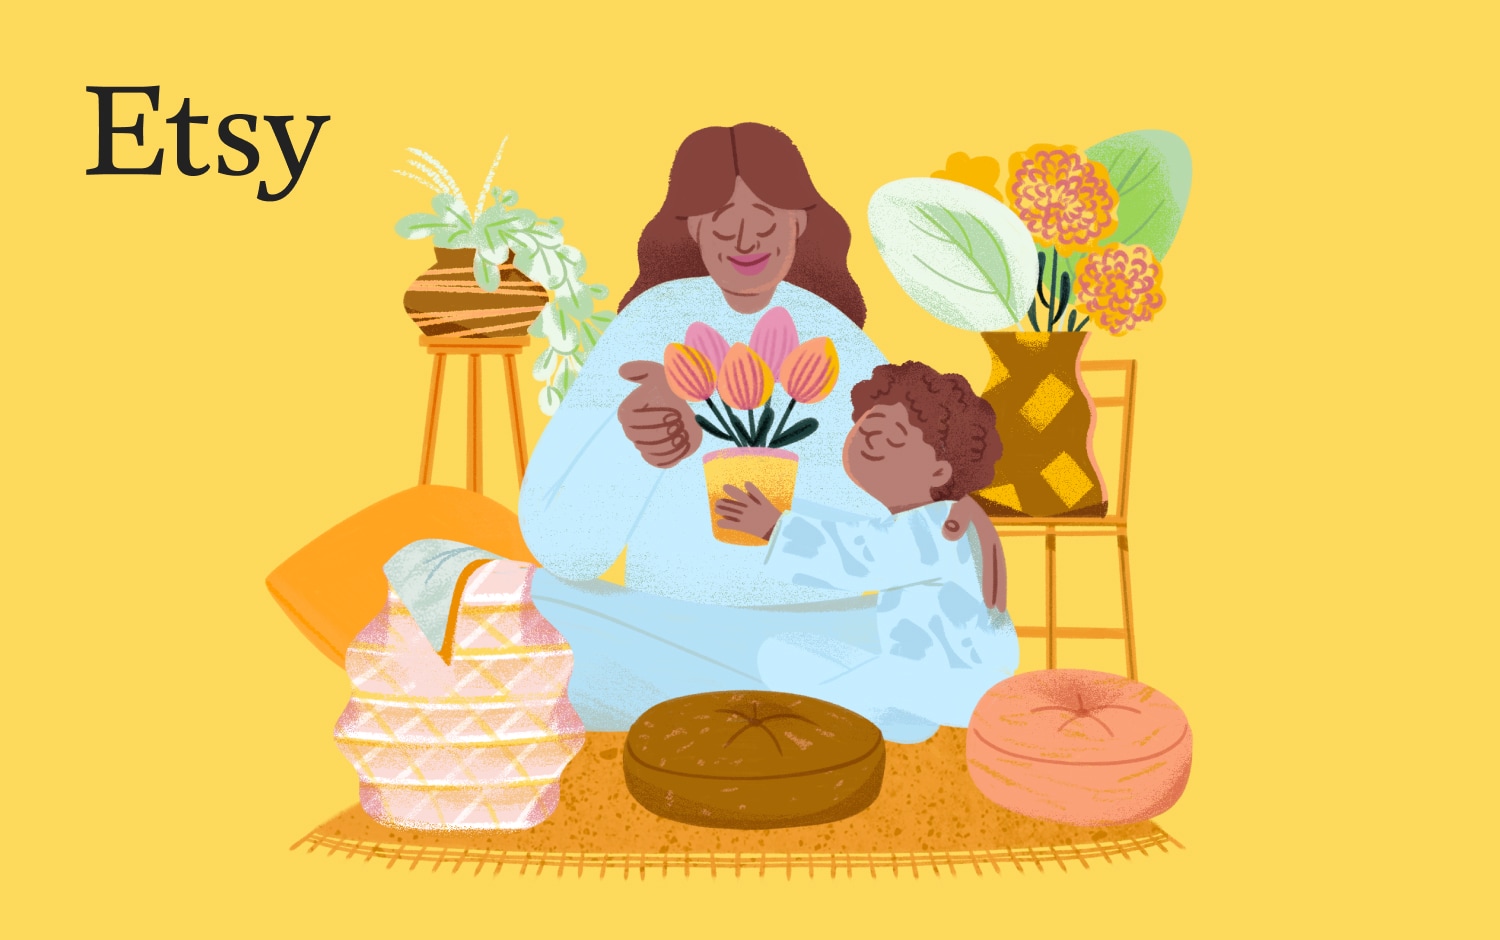 Illustration depicting a woman and a child in a cozy room. The child is presenting a potted tulip plant to the woman, surrounded by indoor plants and two stools. The scene is set against a yellow background, featuring the Etsy logo in black font in the top left corner